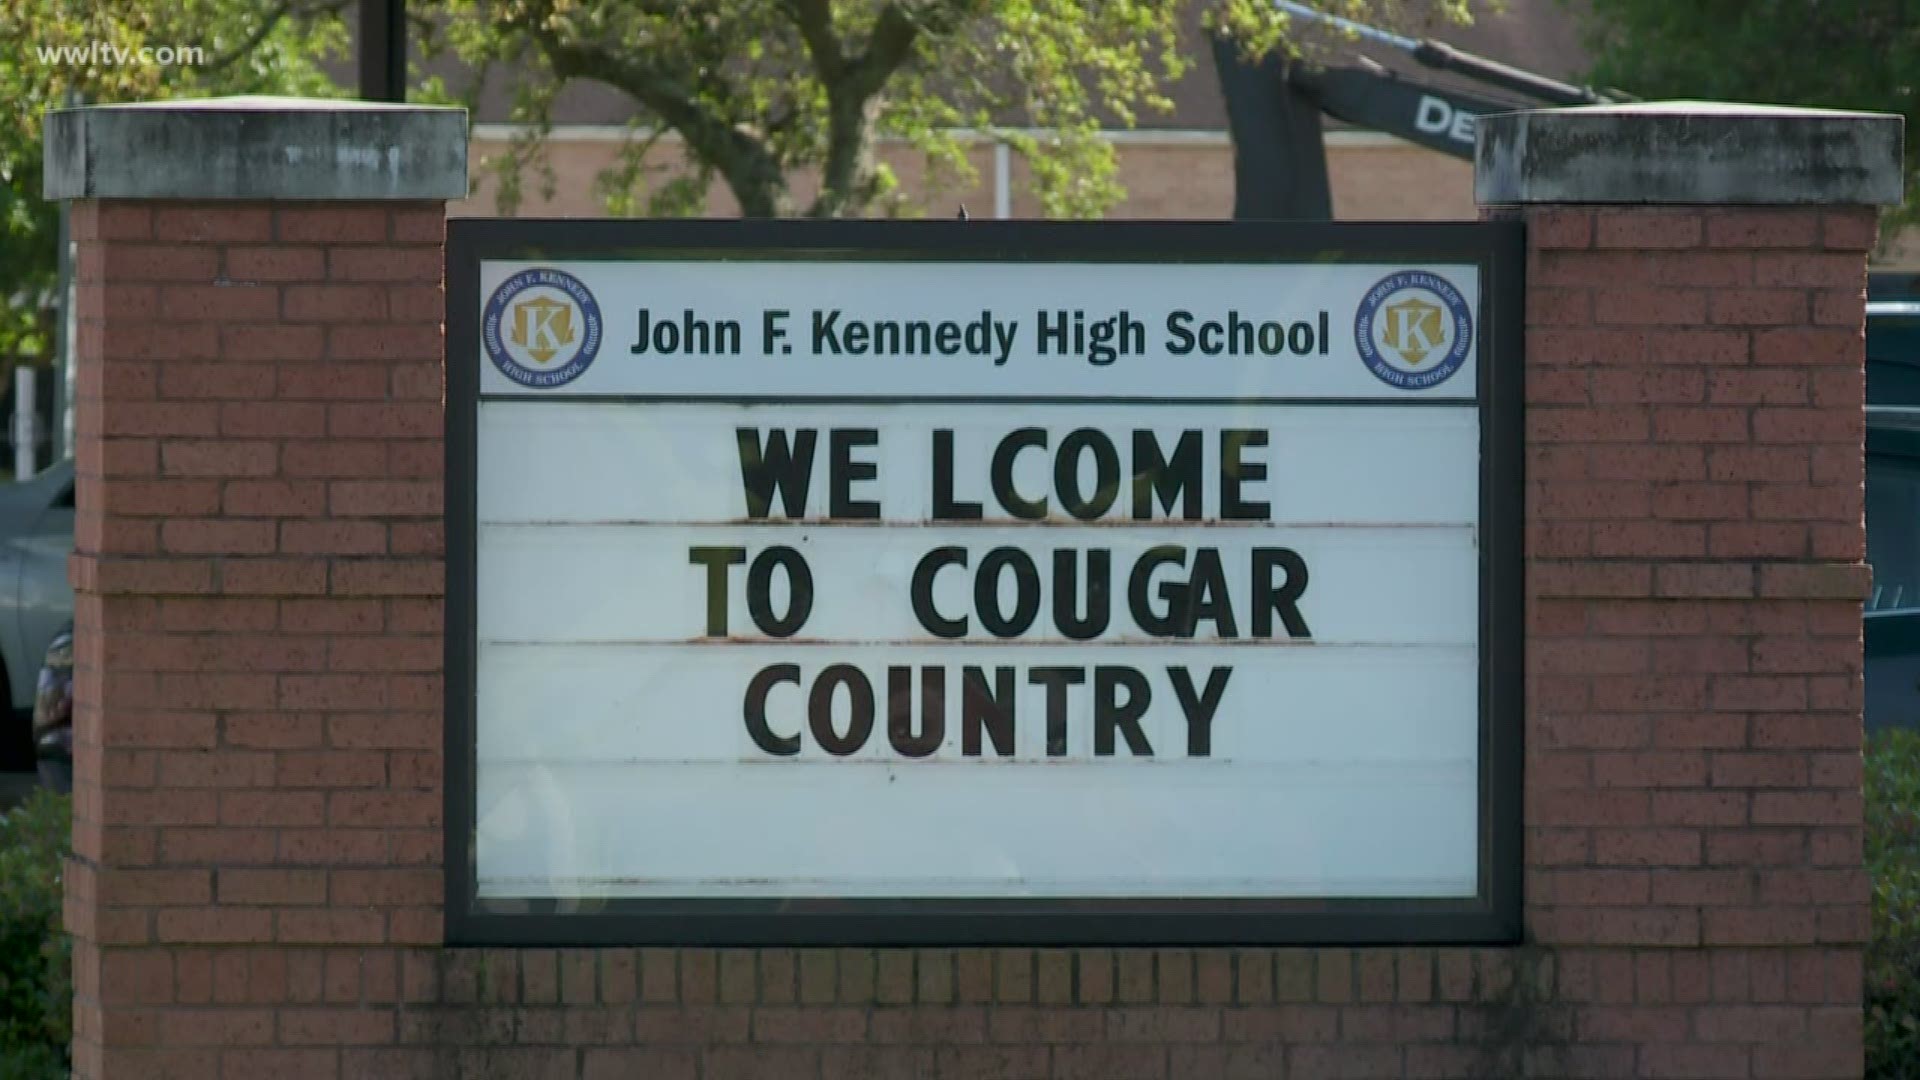 The Orleans Parish School Board is considering revoking the charter for John F. Kennedy High School at Lake Area because of multiple allegations of students’ grades being inflated and public records being changed.